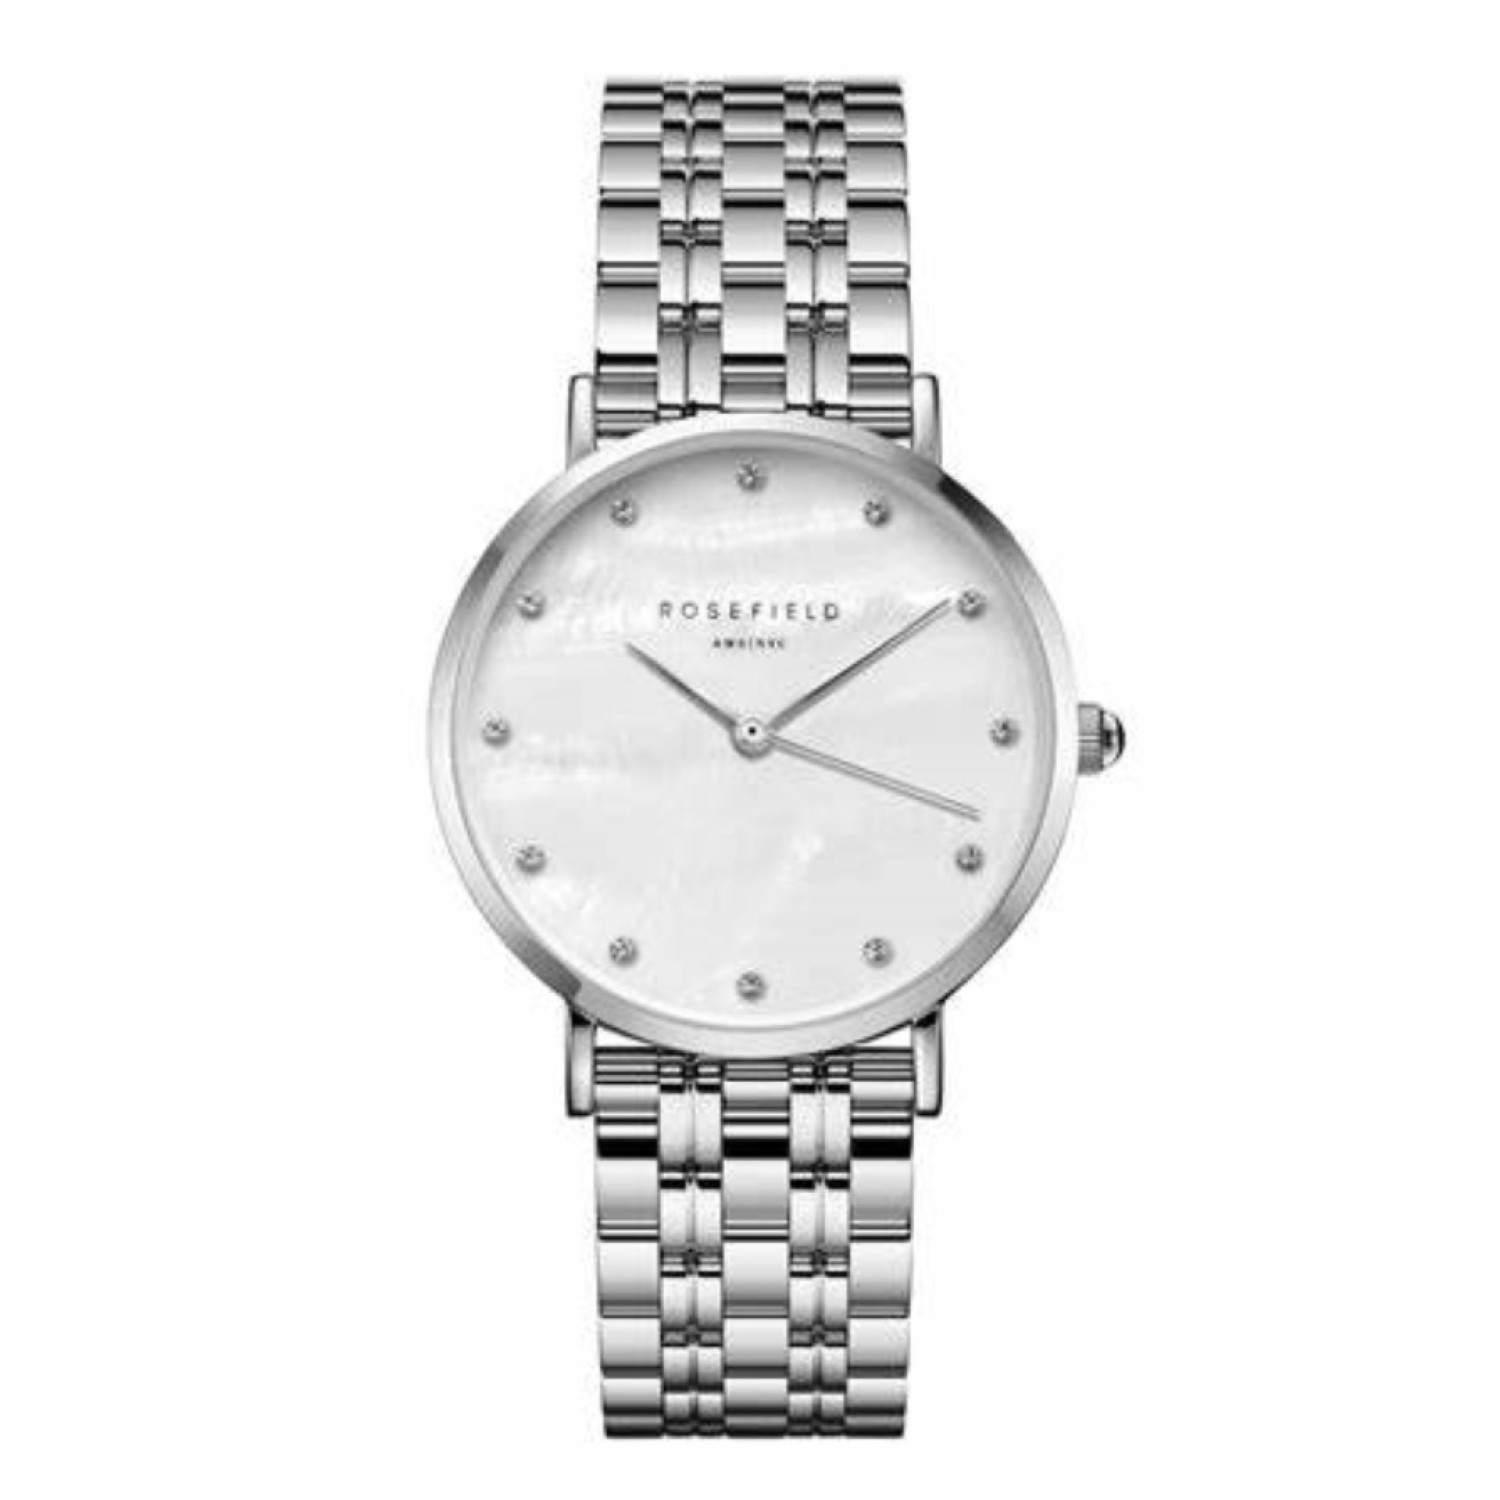 UWSSS-U32 Rosefield Silver UPPER EAST SIDE with Stones Watch UWSSS-U32 Rosefield Watches Auckland | With their stylish designs and packaging, Rosefield watches make excellent gifts for special occasions.